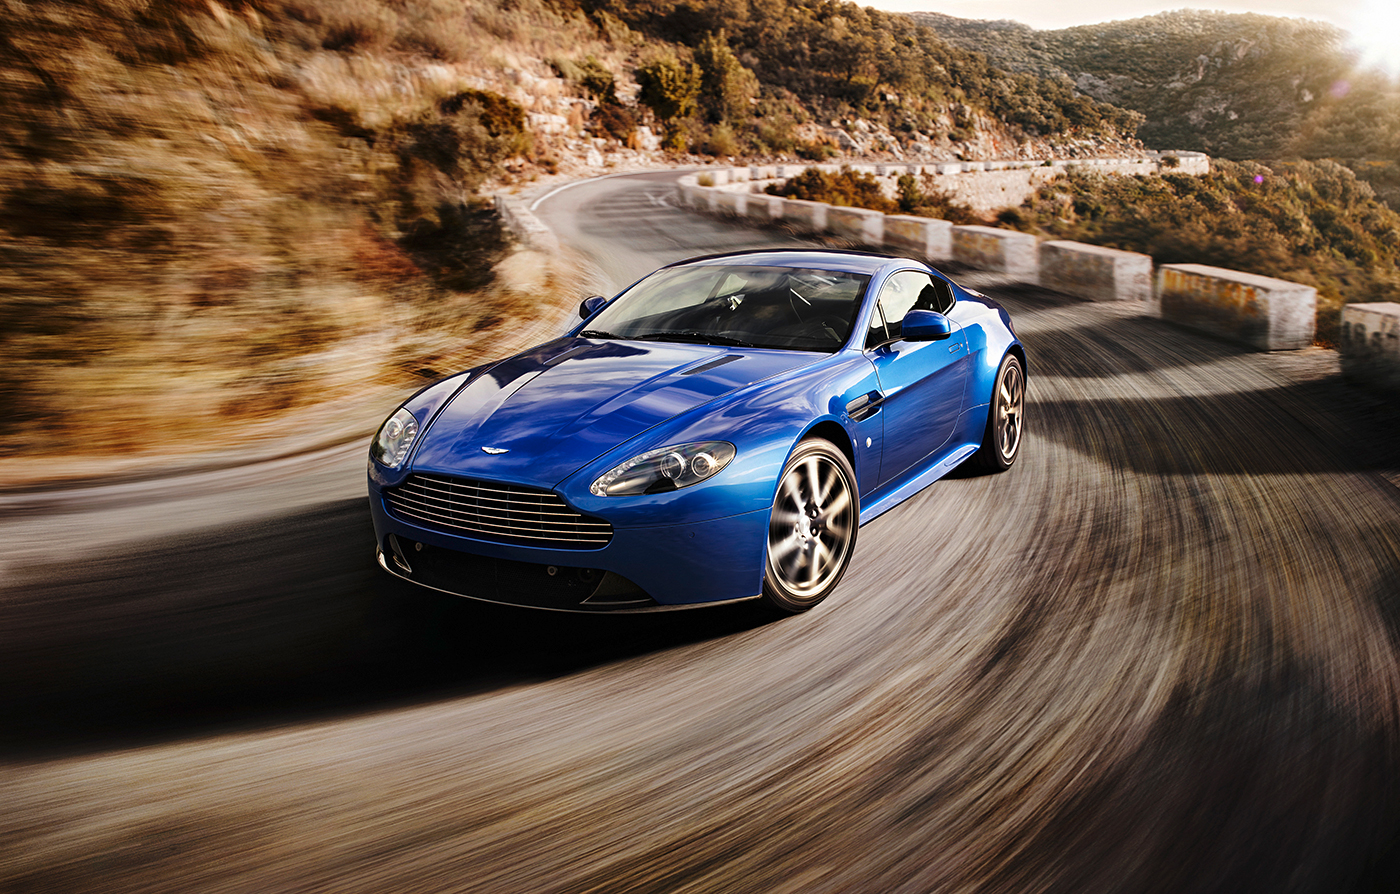 A V8 Vantage with more power, sharper handling and an even greater response